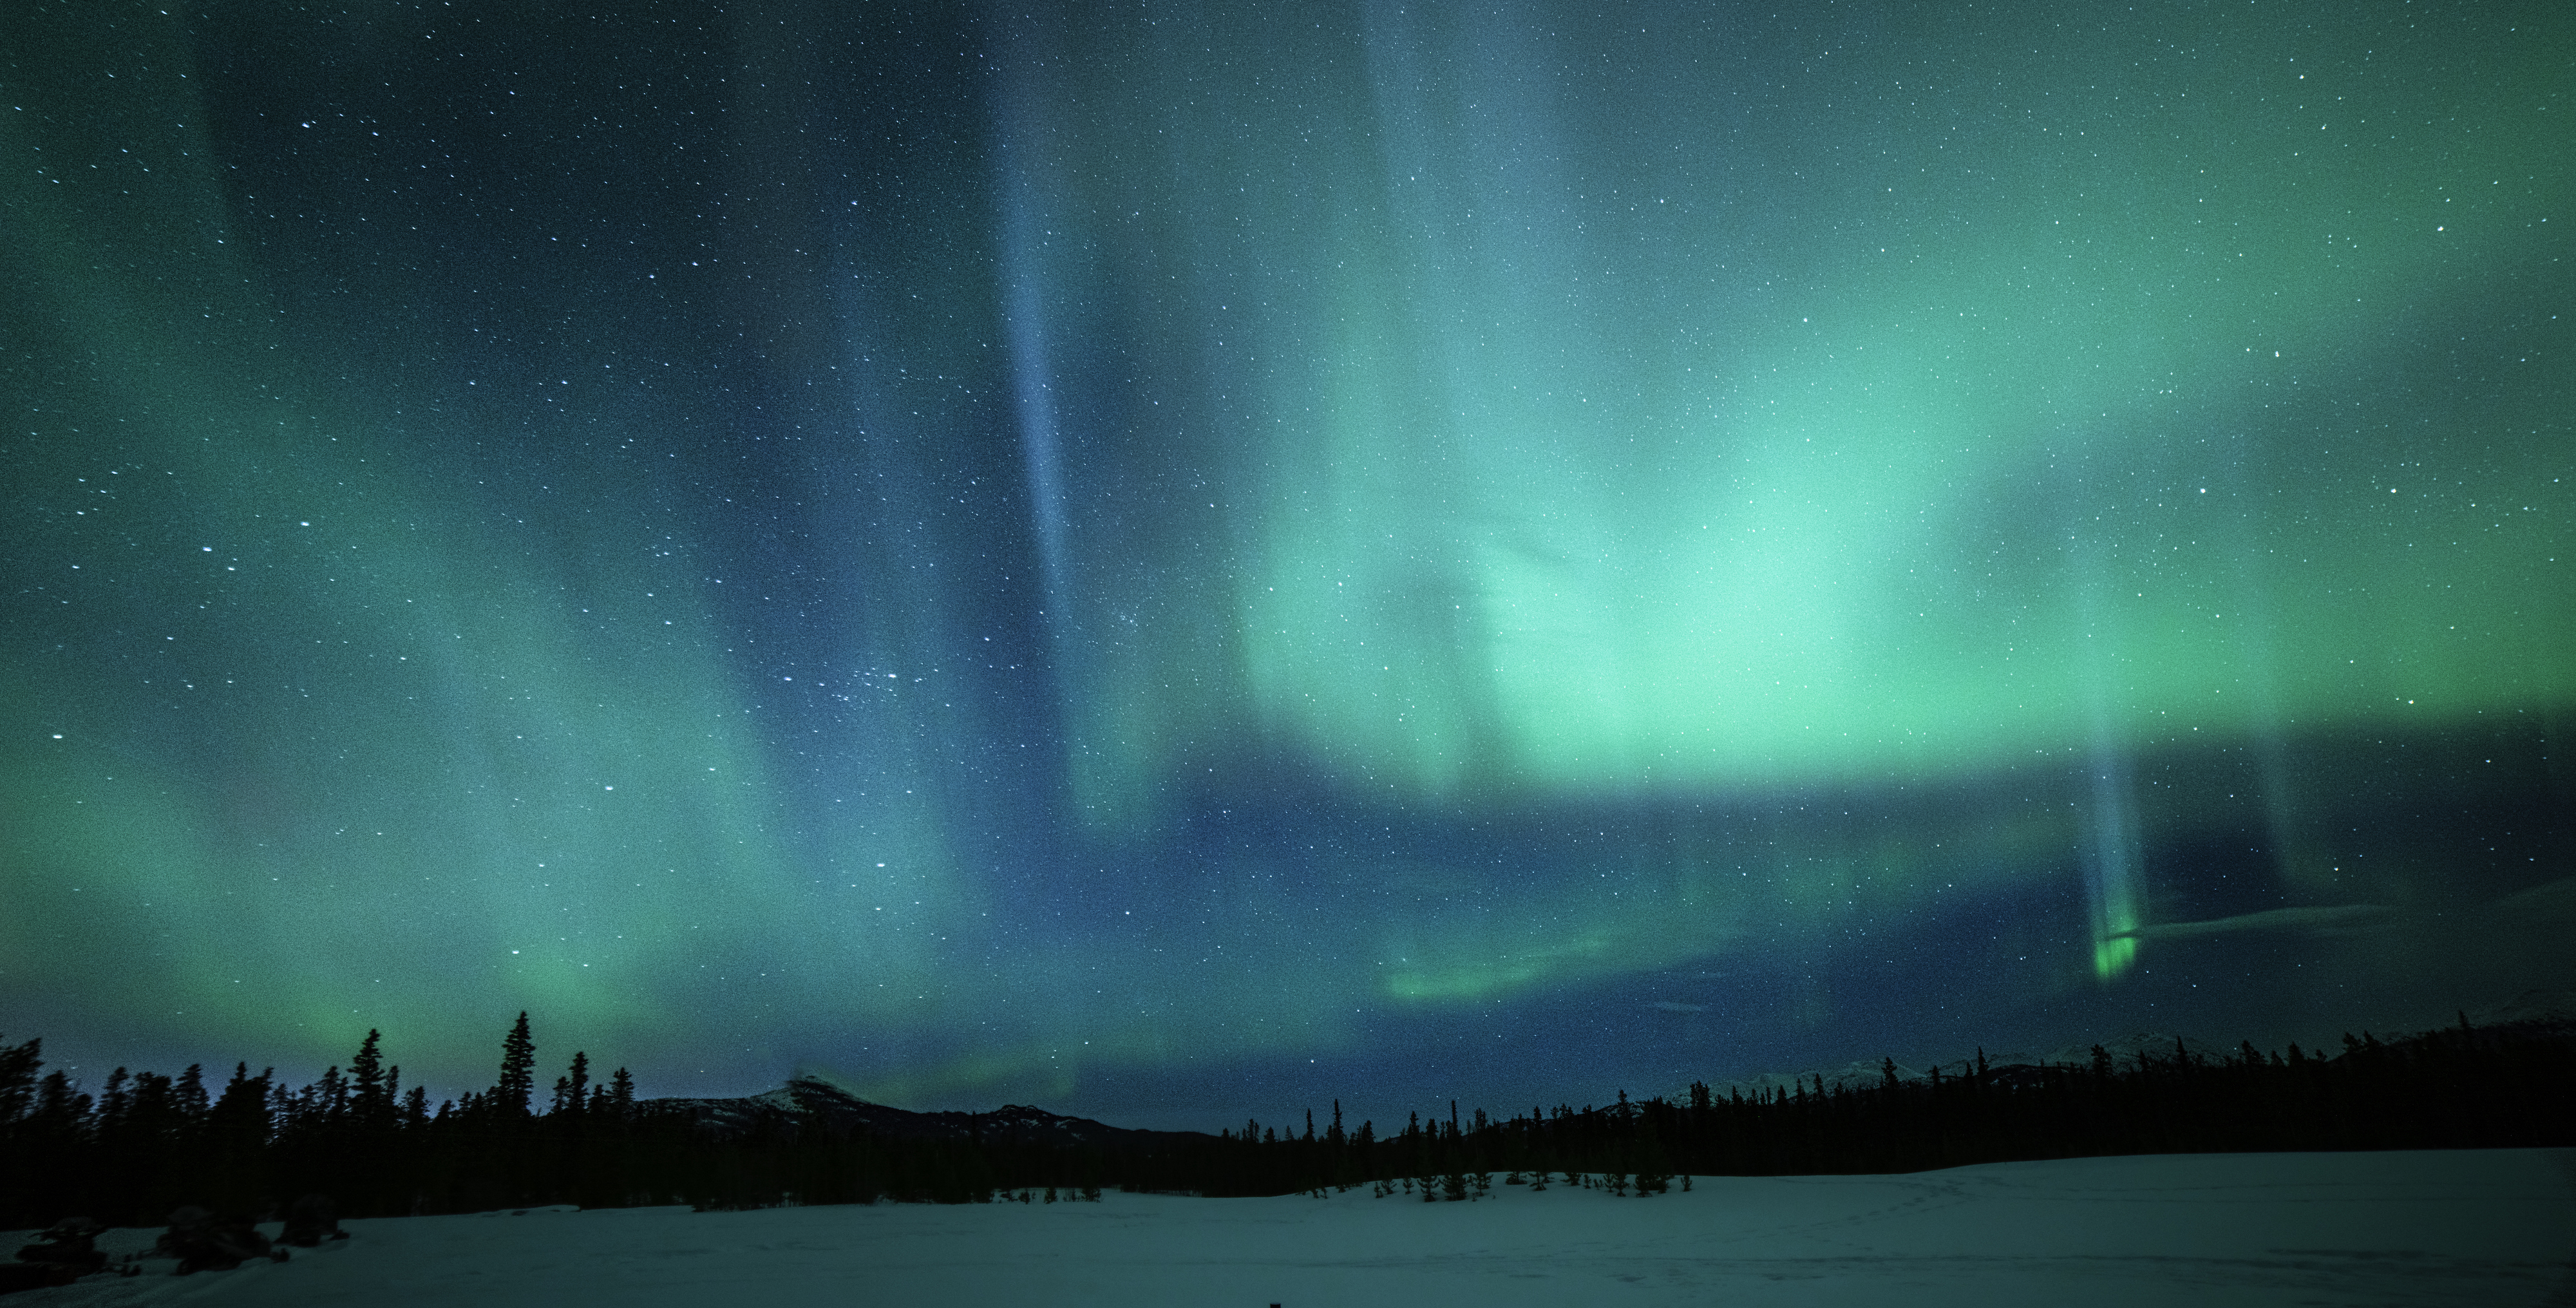 Aurora as seen from about 30 minutes south of Whitehorse in the Yukon